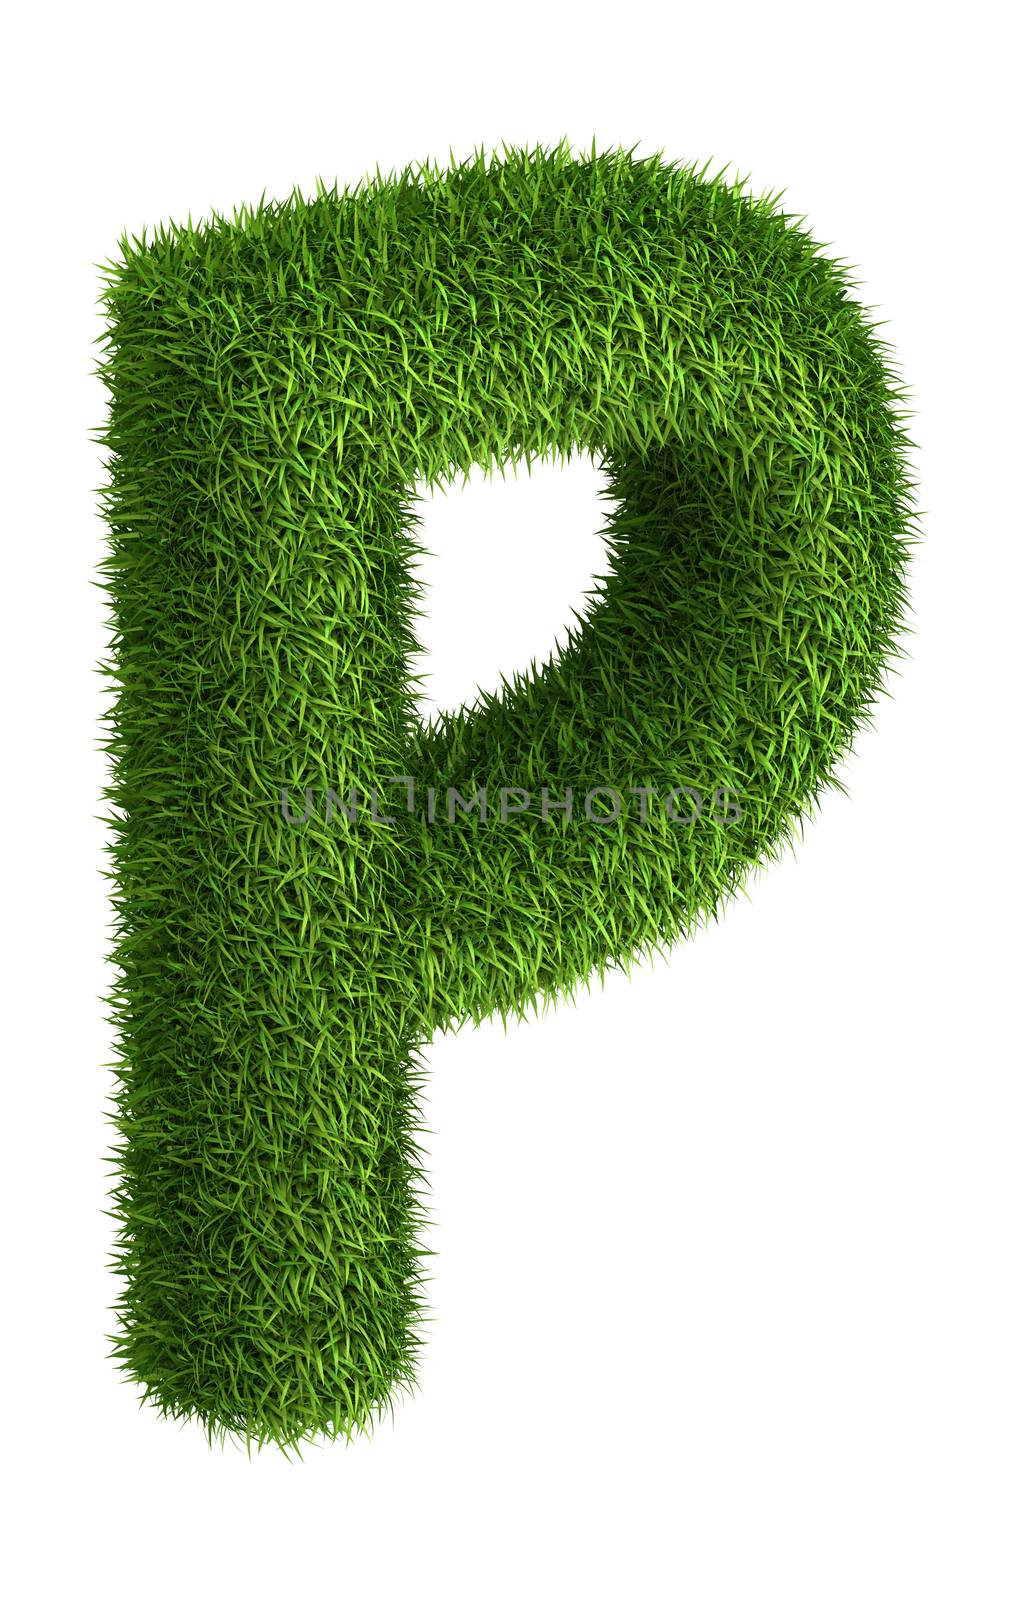 Natural grass letter P by iunewind